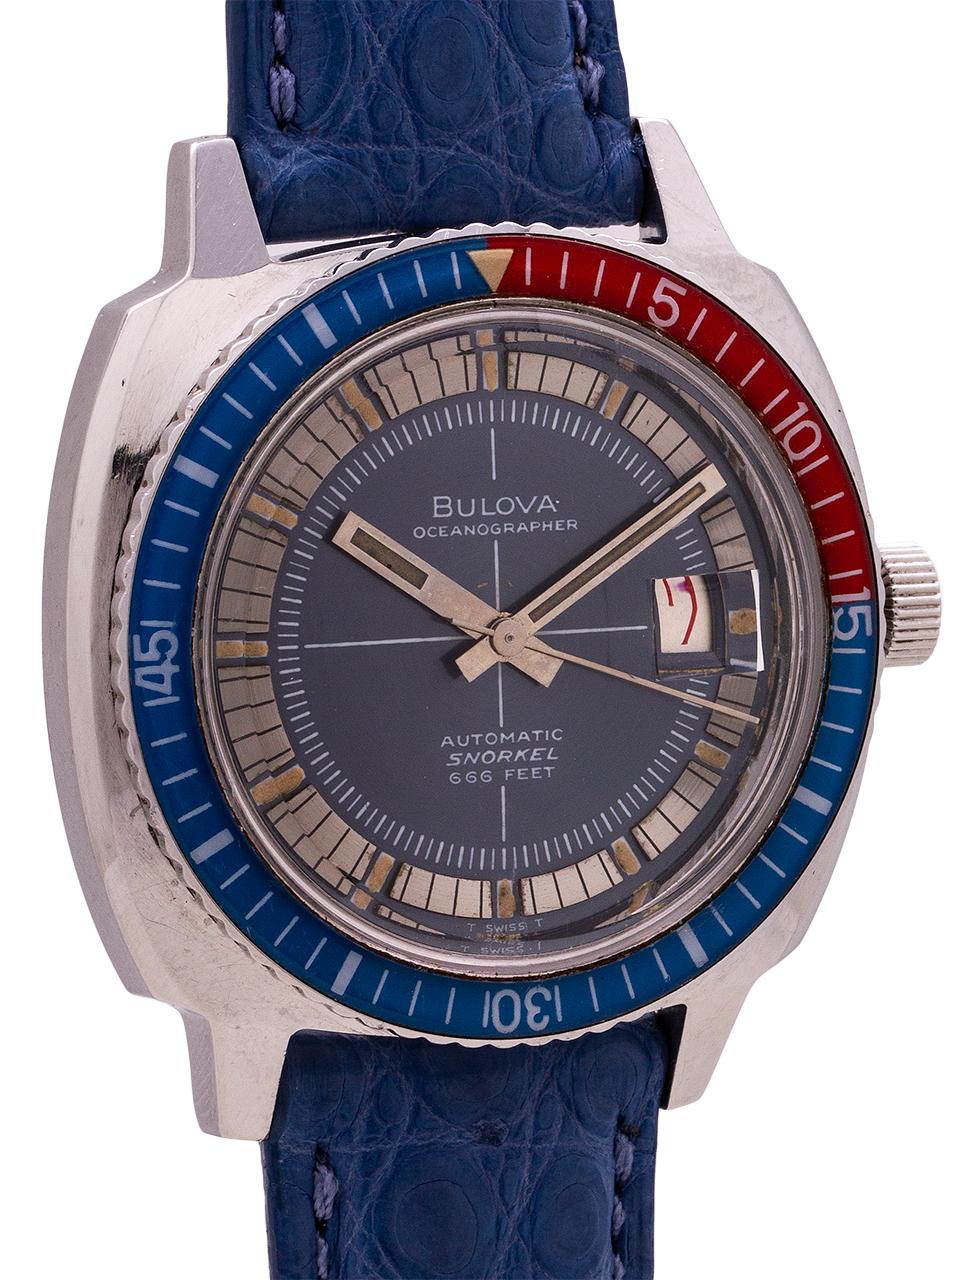 
An exceptional condition and great looking Bulova Oceanographer, a 1970’s steel dive watch with rich color and great graphic details. With 36mm diameter cushion shaped screw down case back with oversize crown, and powered by self winding movement